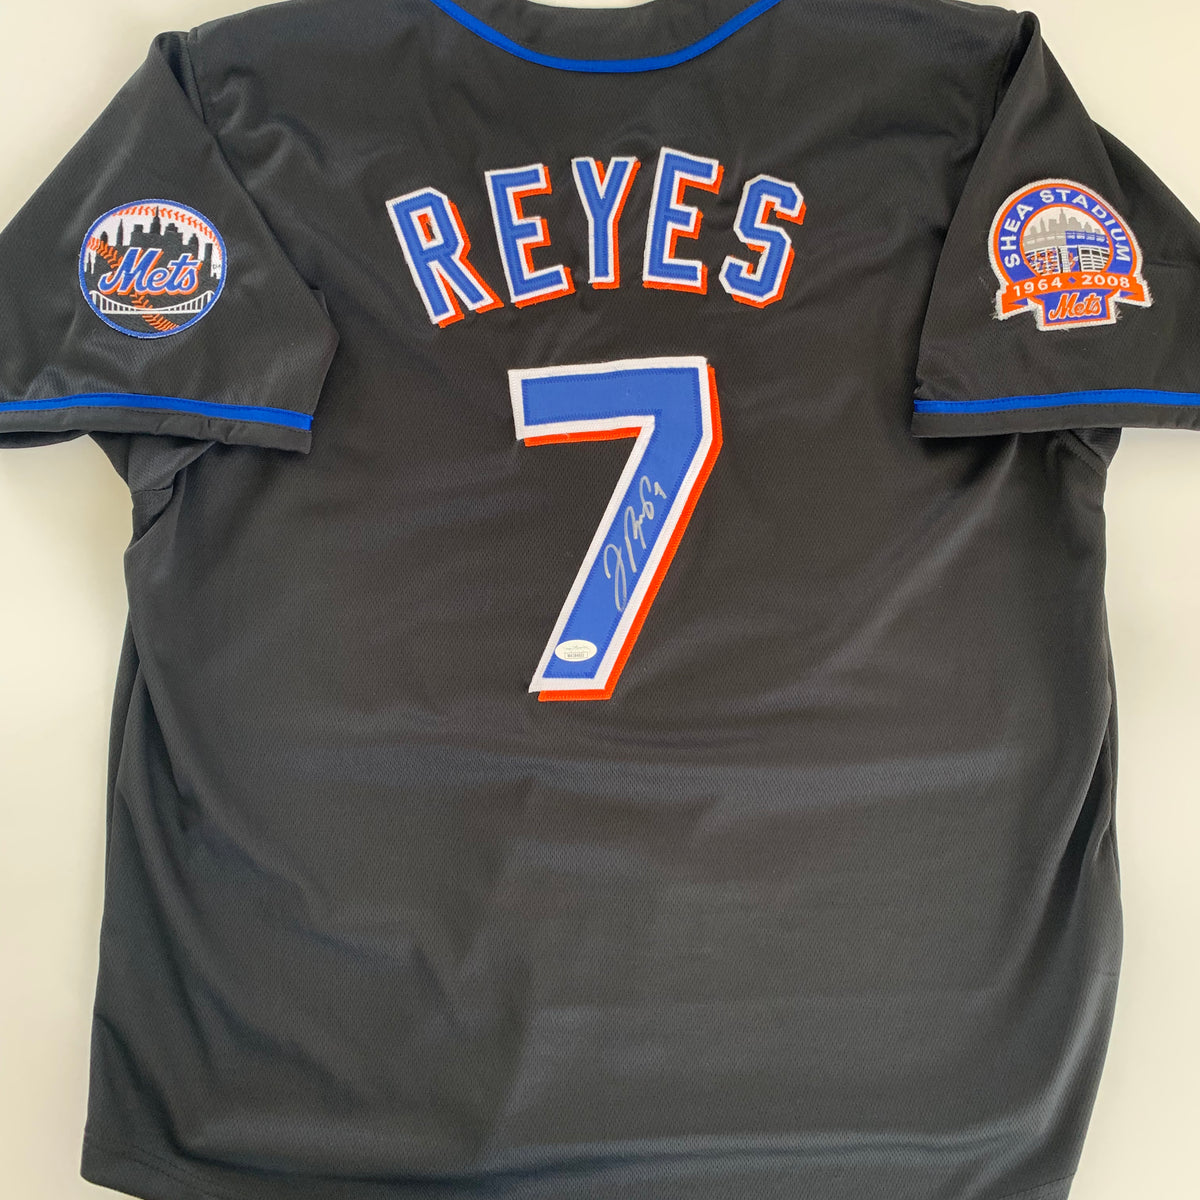 Jose Reyes Autographed 2004 Home Jersey - Mets History